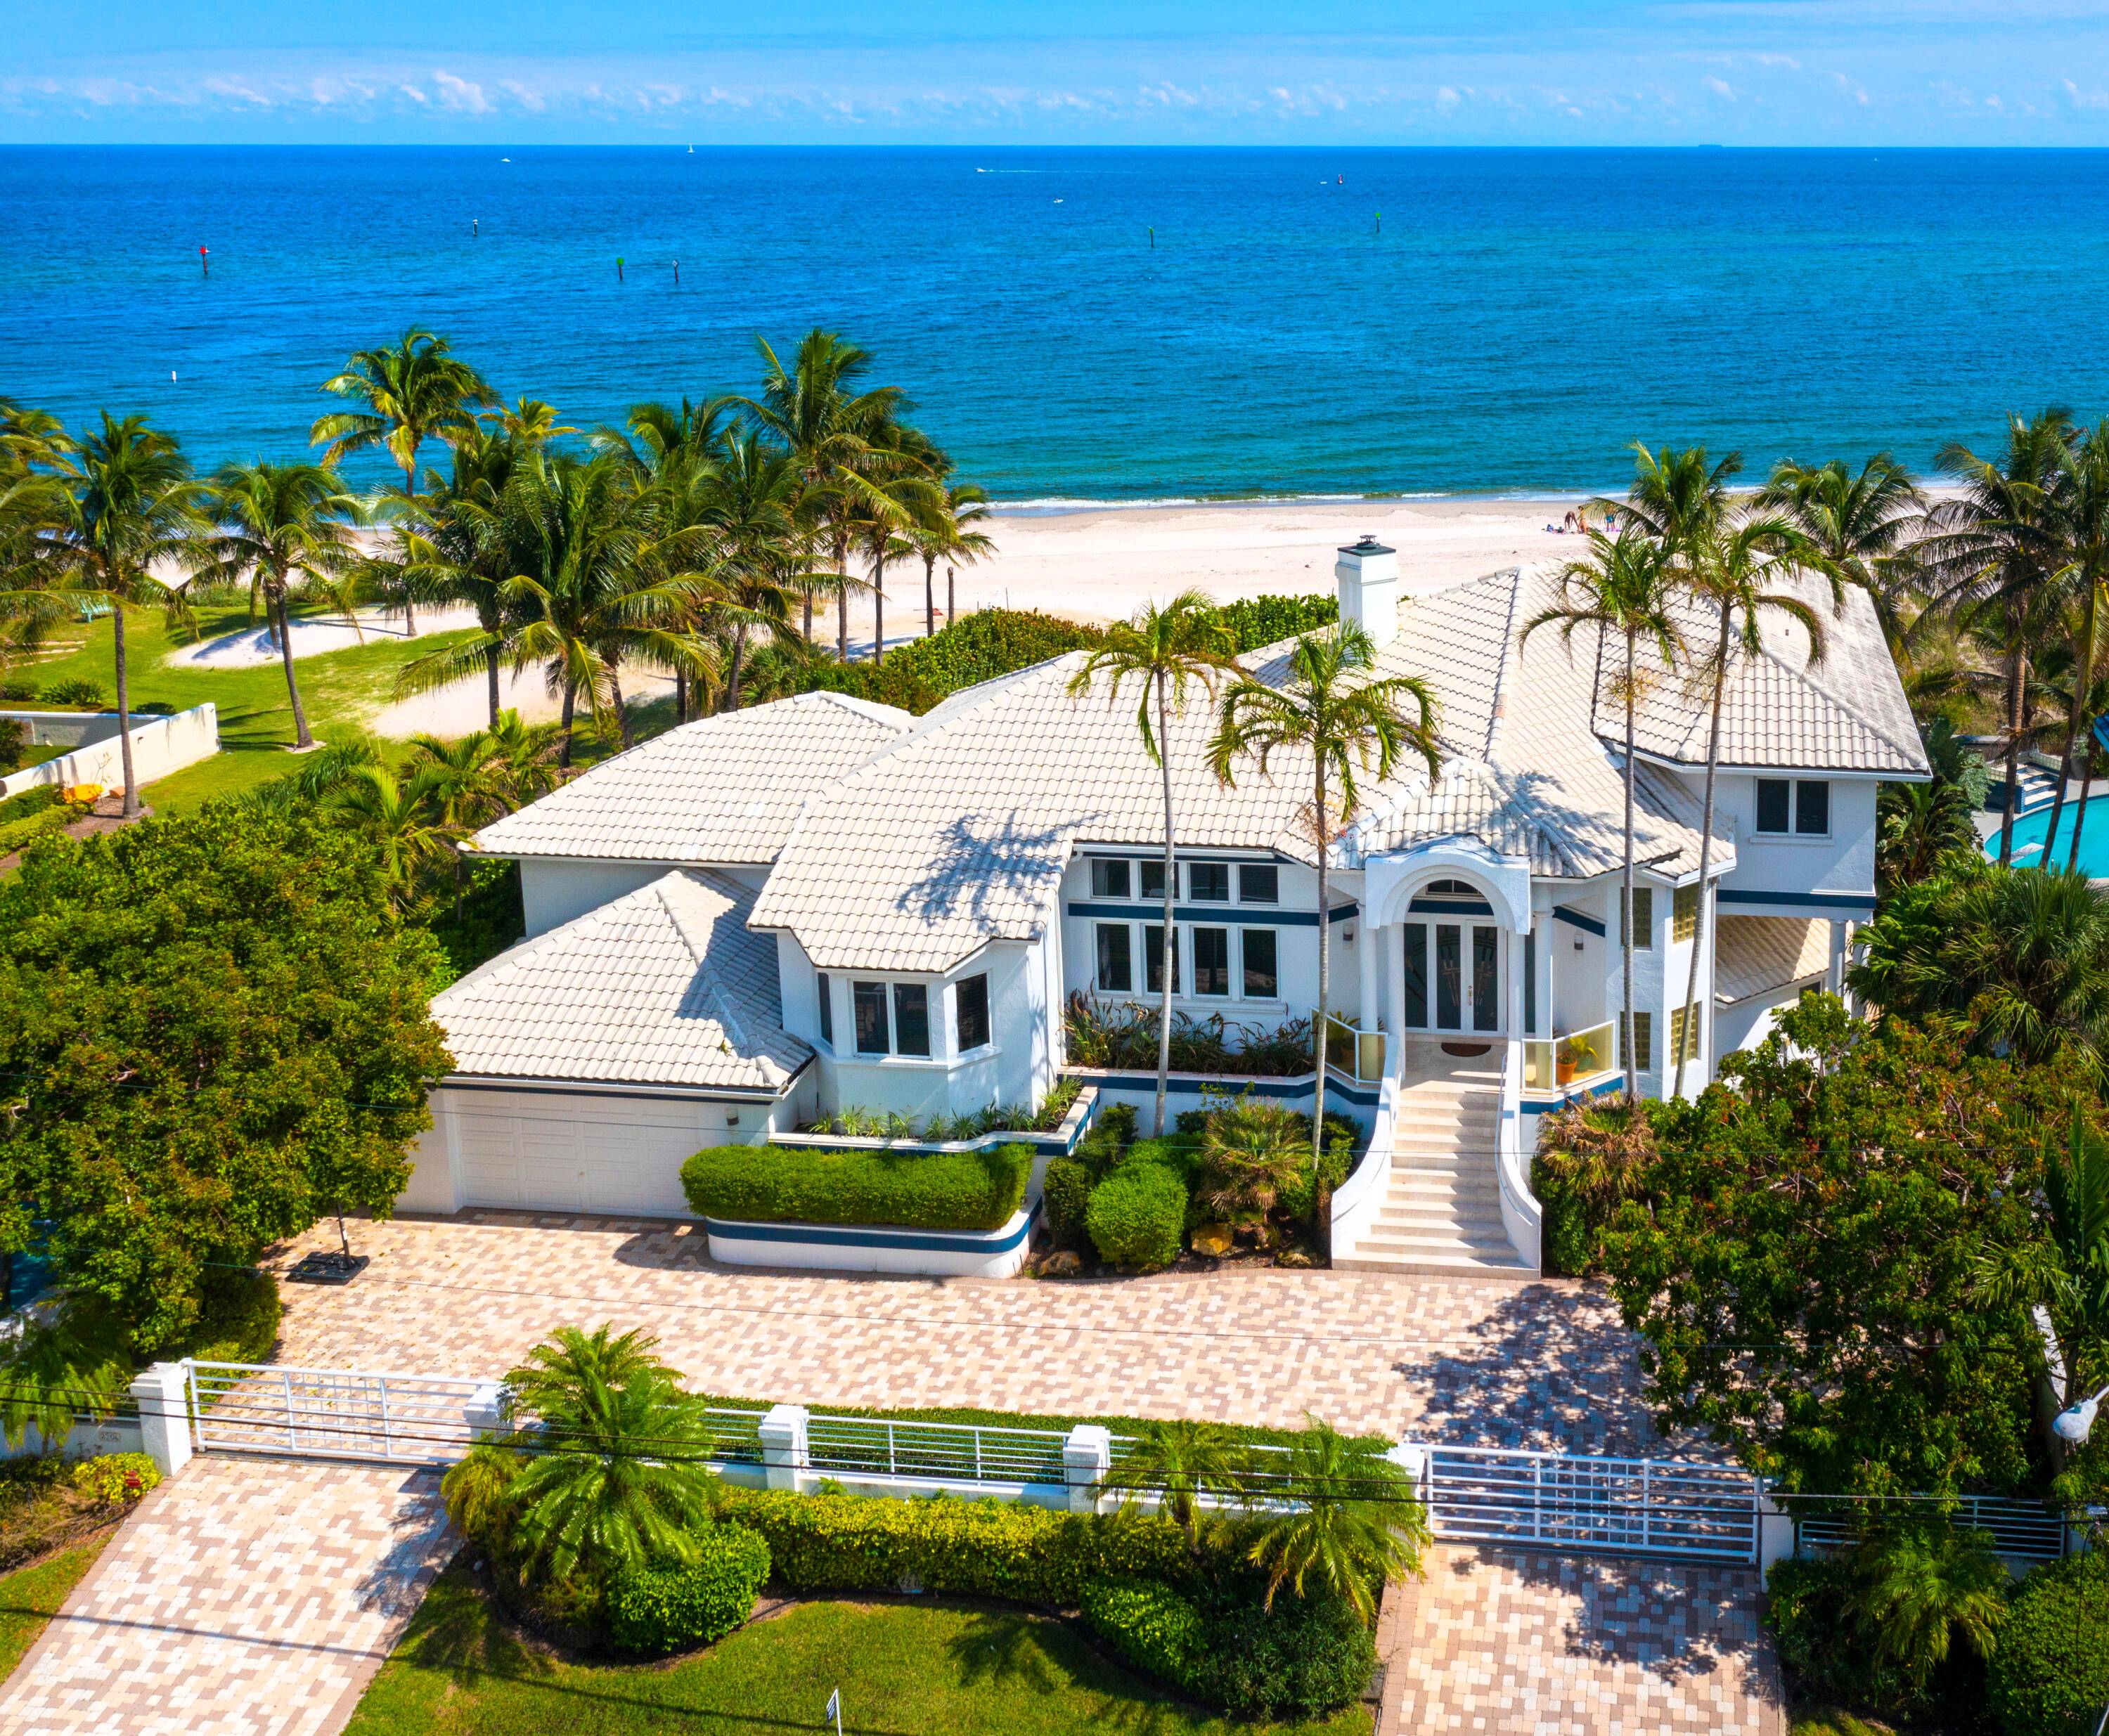 Welcome to your private oceanfront oasis at 2204 Bay Drive, a luxurious 5 bedroom, 5 bathroom retreat that sleeps up to 16 guests.